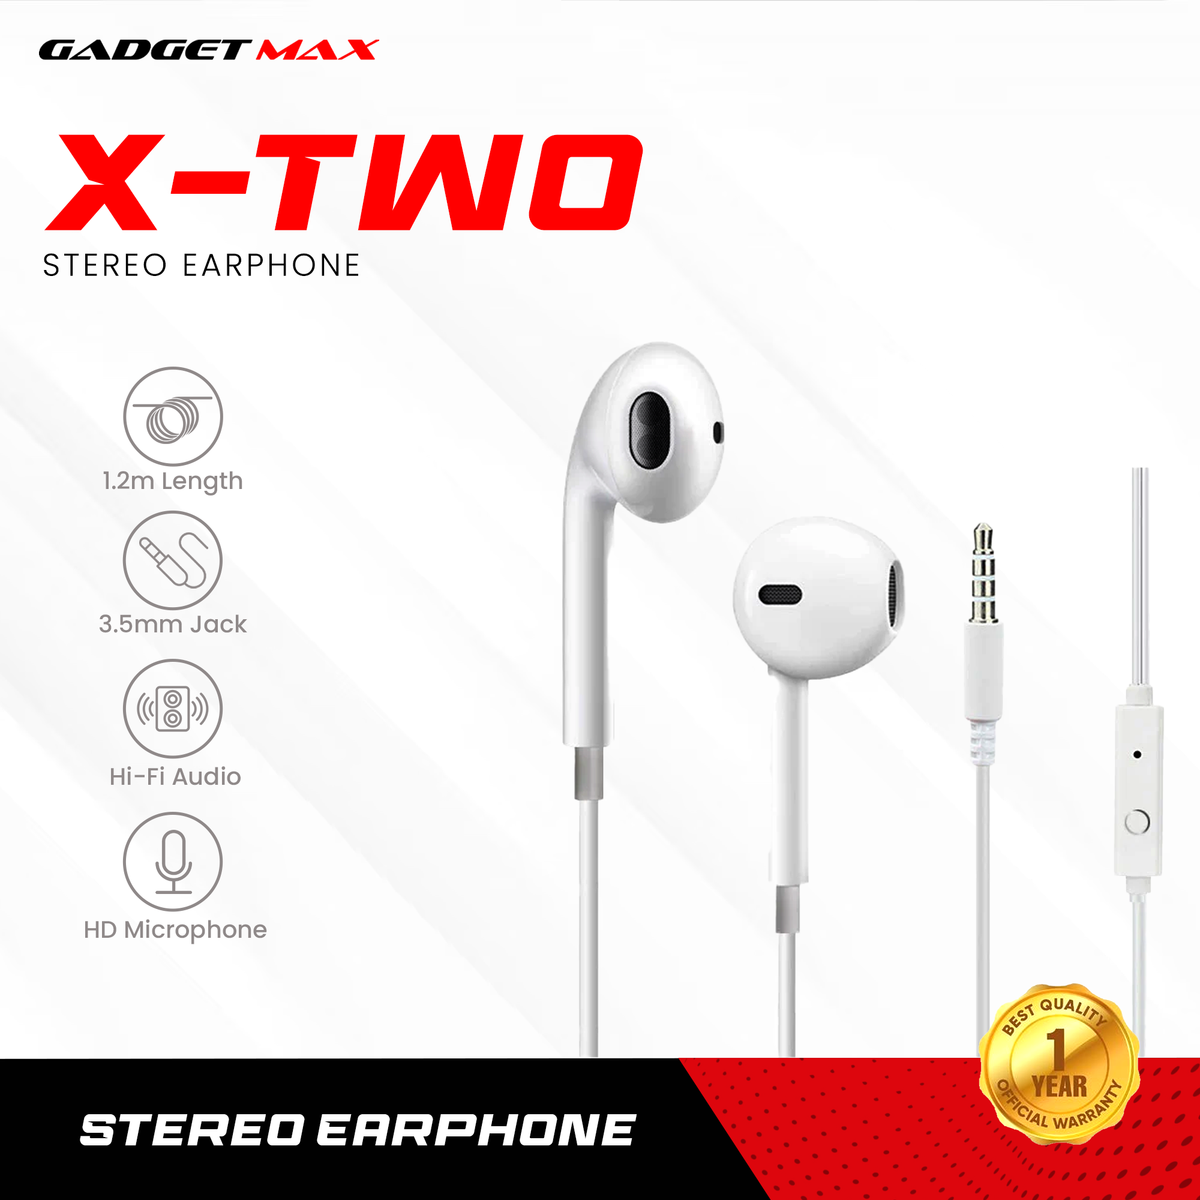 GADGET MAX  X-Two Stereo 3.5MM Earphone Sound Quality Earphone, Wired Earphone